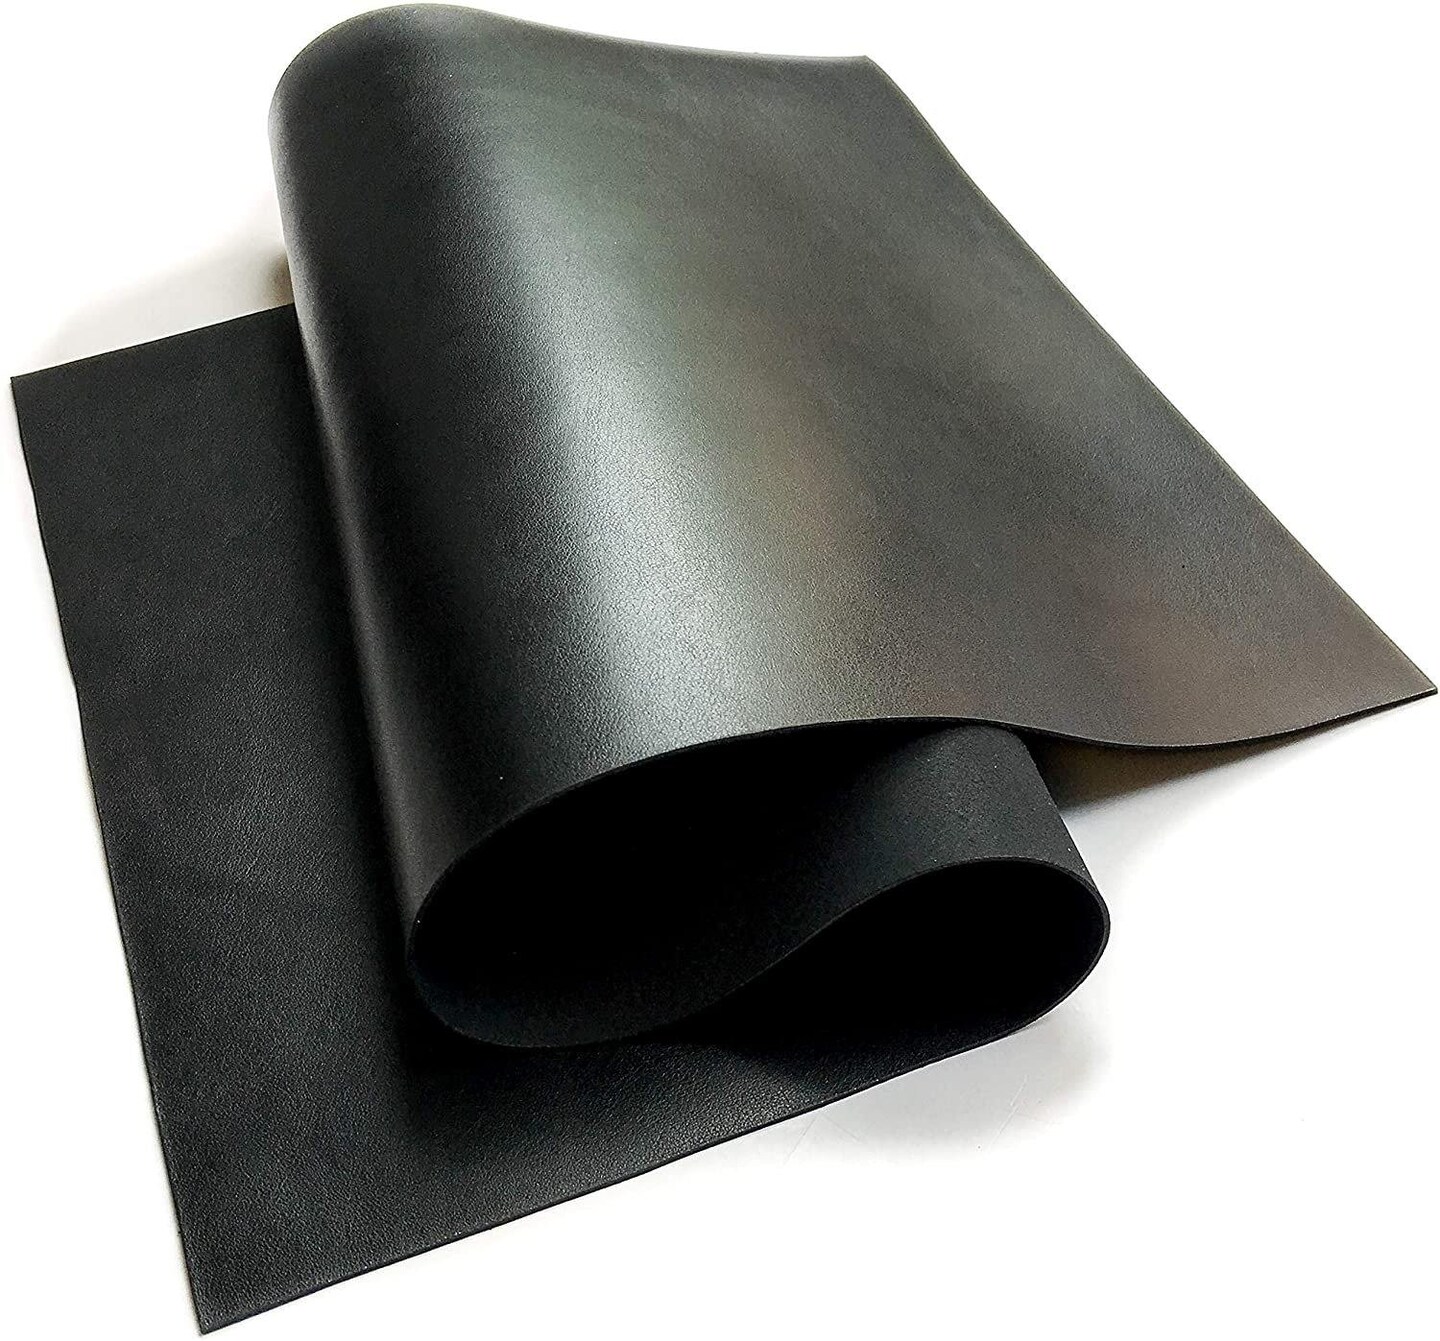 ingguise Black Leather Sheets for Crafts Tooling Leather Square 1.8-2.1mm Thick Full Grain Leather Pieces Genuine Cowhide Leather for Crafts Sewing Hobby